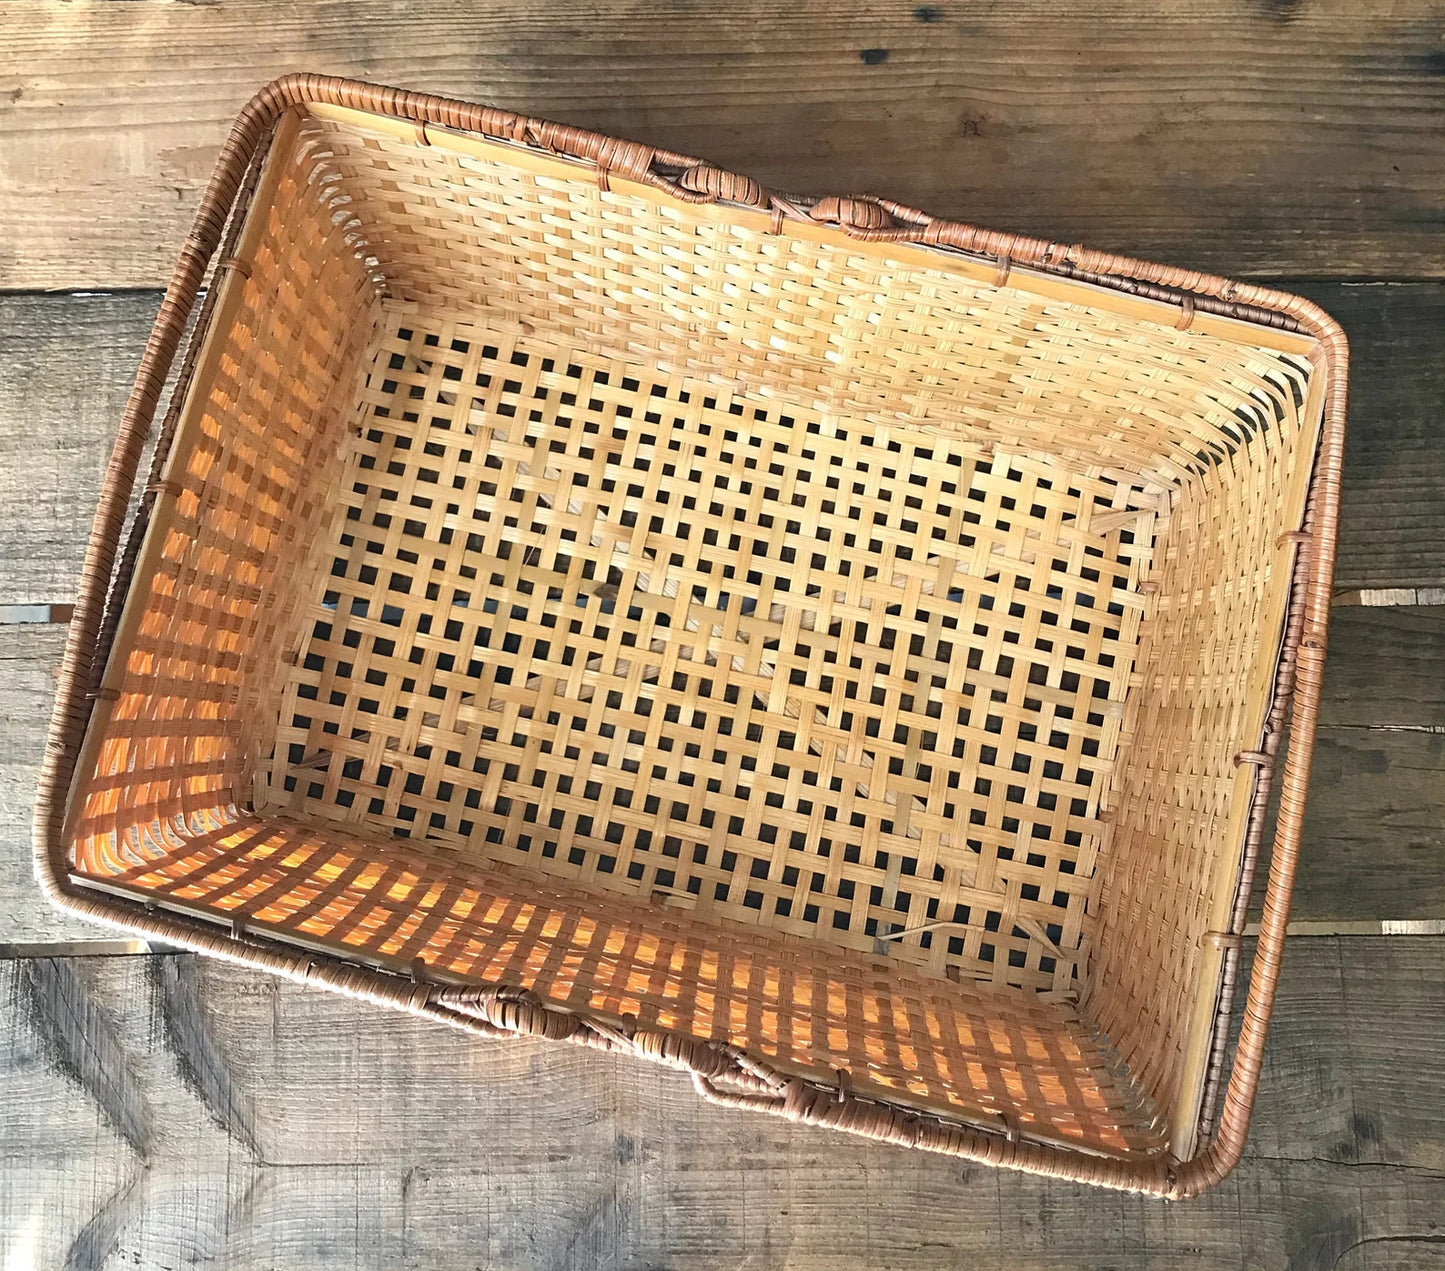 Lightweight Square Basket with Handles